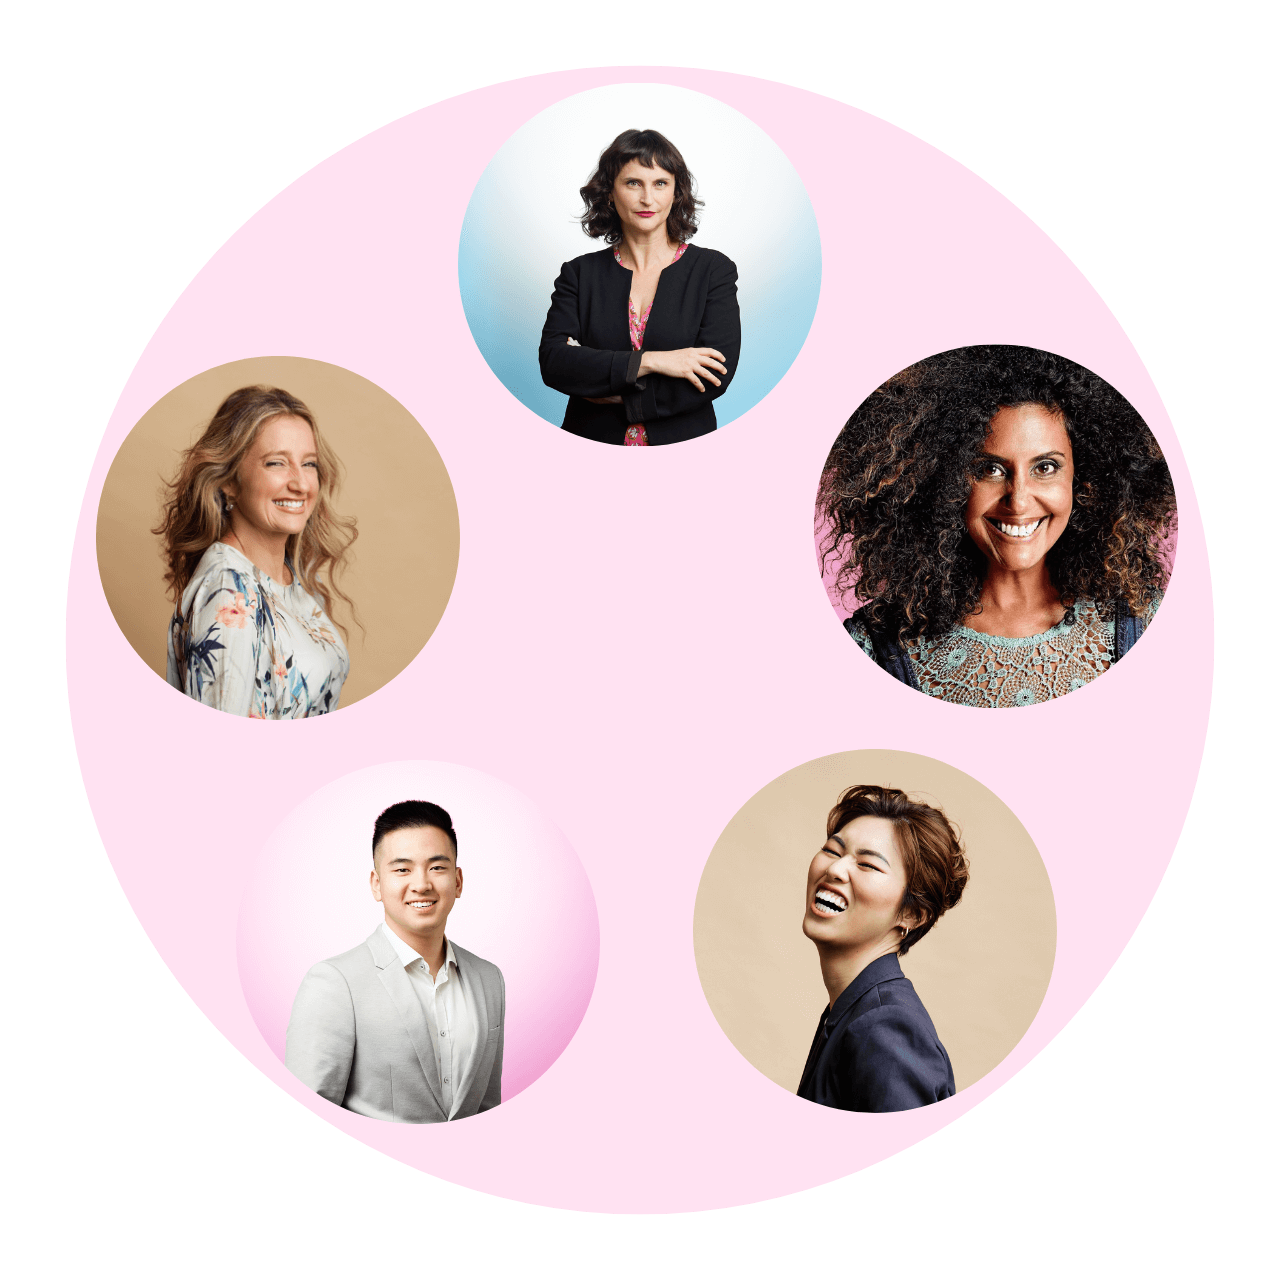 A graphic collage showing 5 examples of professional headshots.
The headshots are in circles against a pale pink background.
There's a blonde woman smiling, a corporate man in grey jacket, a woman laughing, a determined woman arms folded and a smiling woman with an afro.